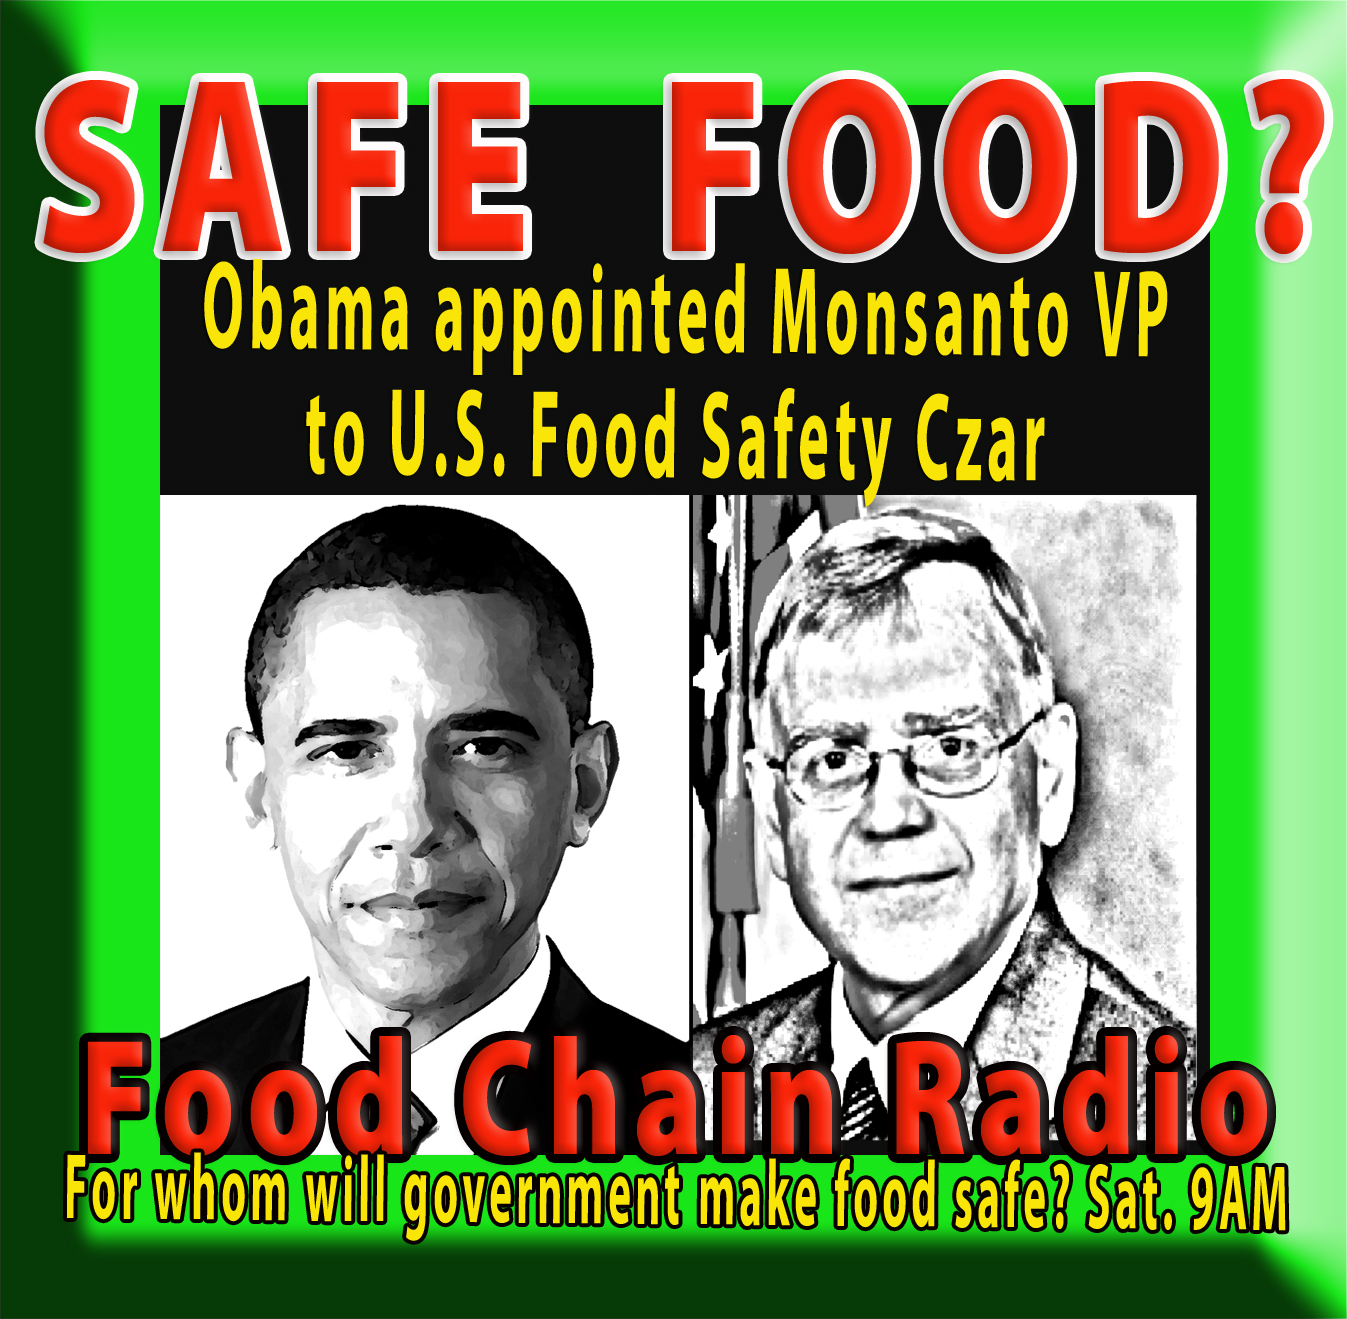 Michael Olson Food Chain Radio: Food Safey Modernization Act – For whom will government’s proposed food safety rules make food safe?